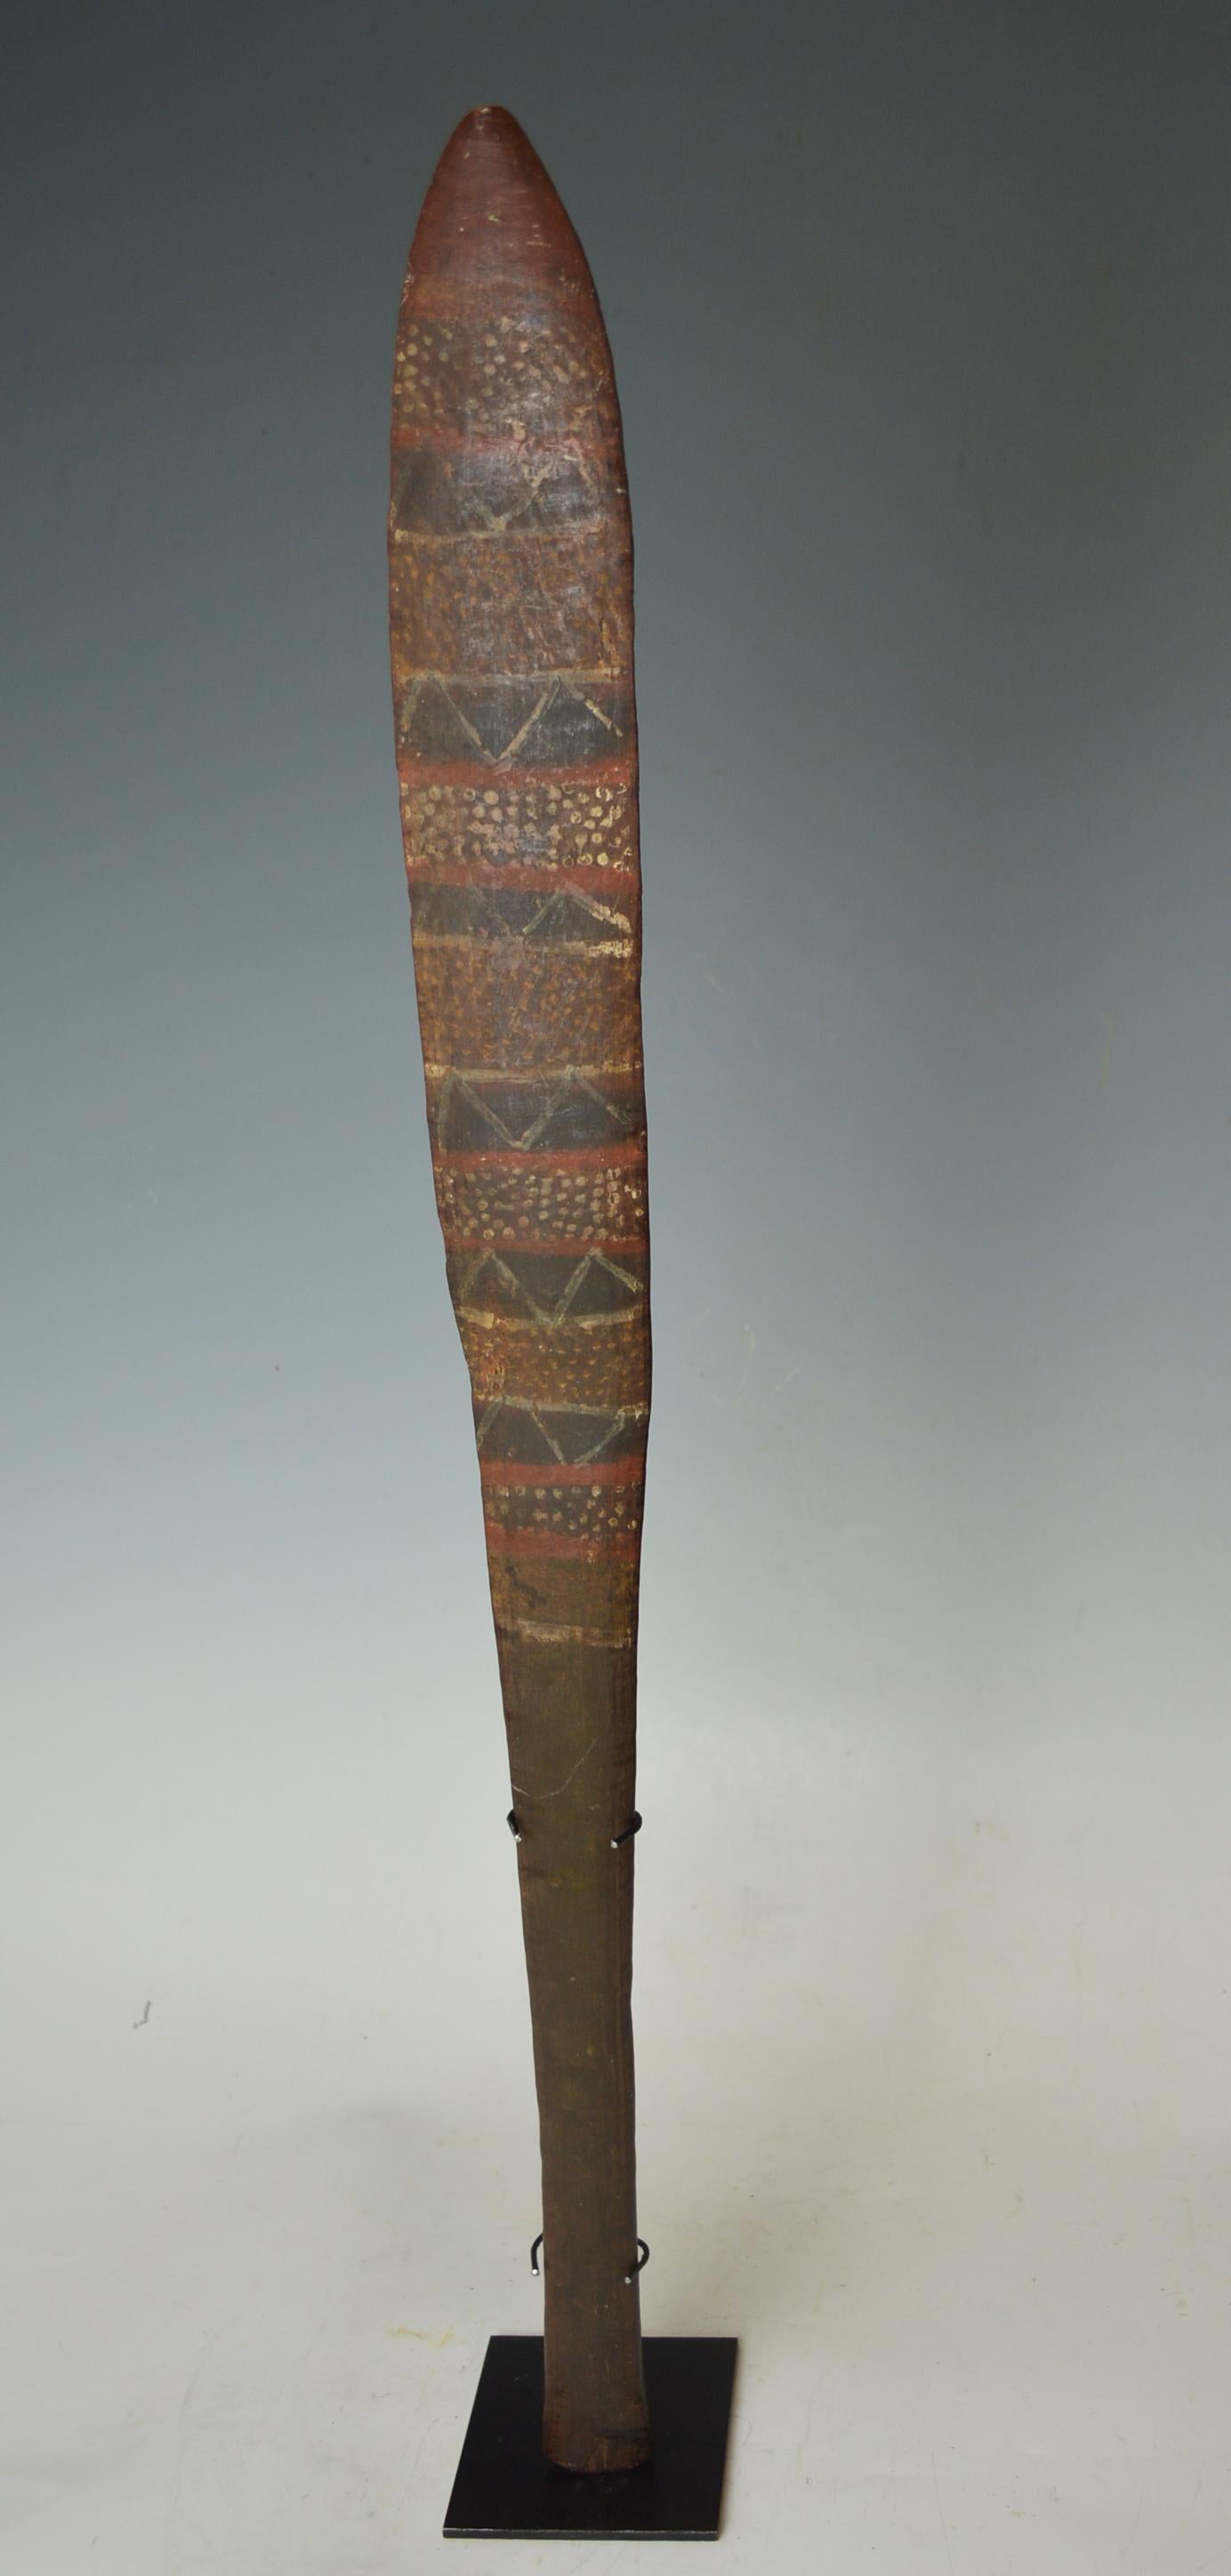 Fine rare Old Aboriginal Tiwi Islands ceremonial paddle club
The very finely carved club in hard dark wood with fluted shaft and slender elongated blade resembling a paddle,
painted with circular designs and linear patterns on the front and back,